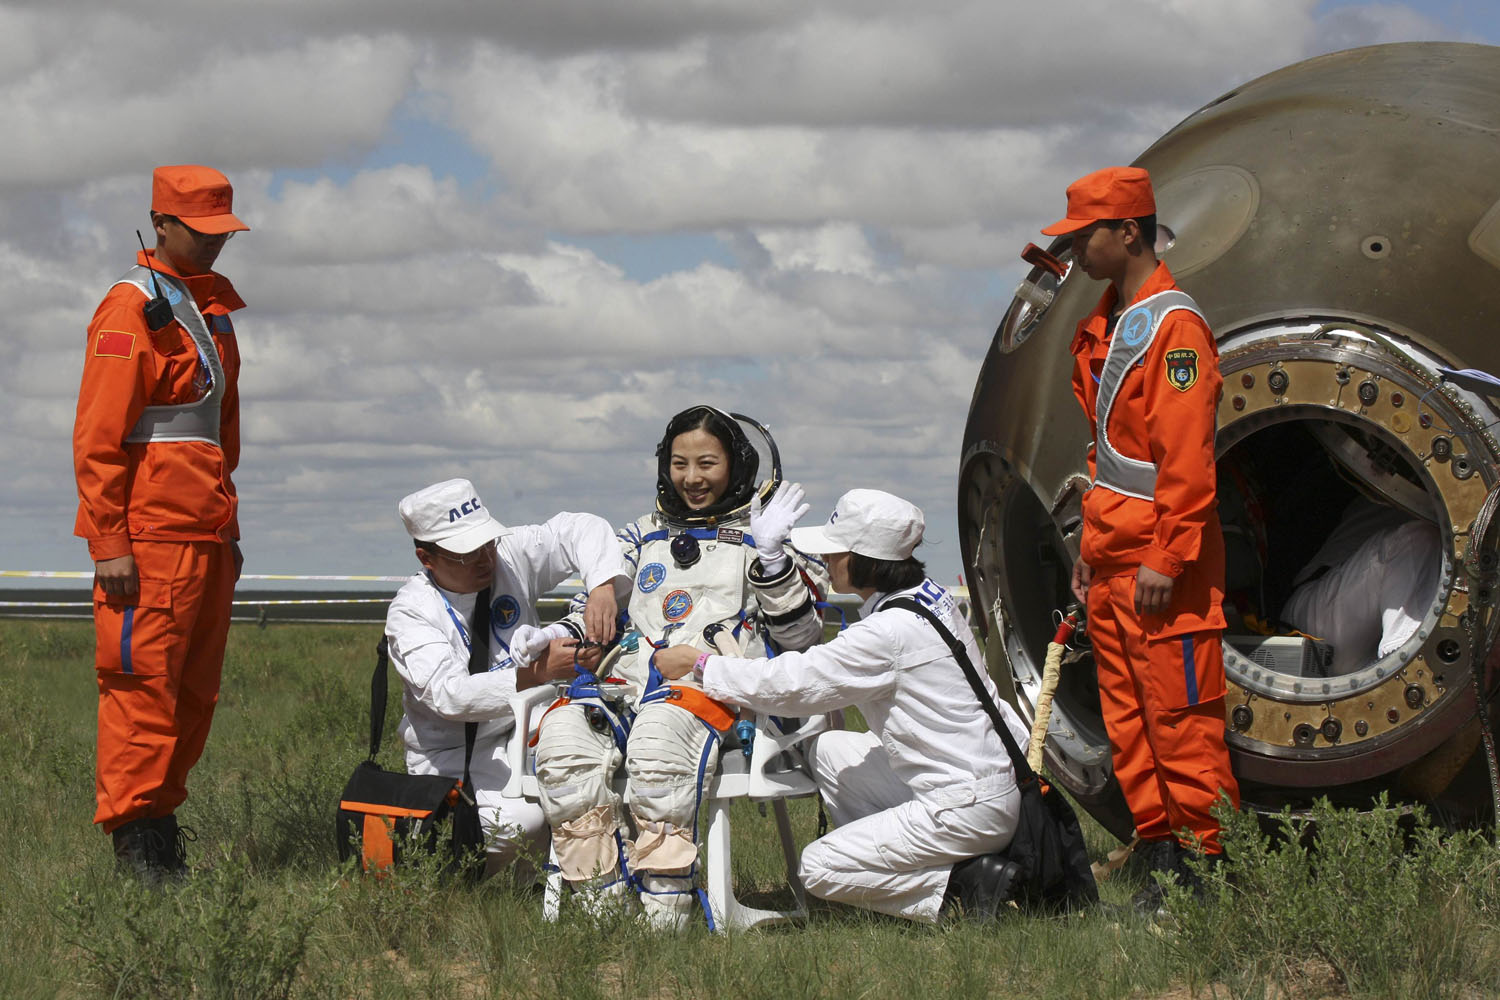 Chinese astronaut Wang waves after she gets out from re-entry capsule of China's Shenzhou-10 spacecraft returning to earth at its main landing site in north China's Inner Mongolia Autonomous Region